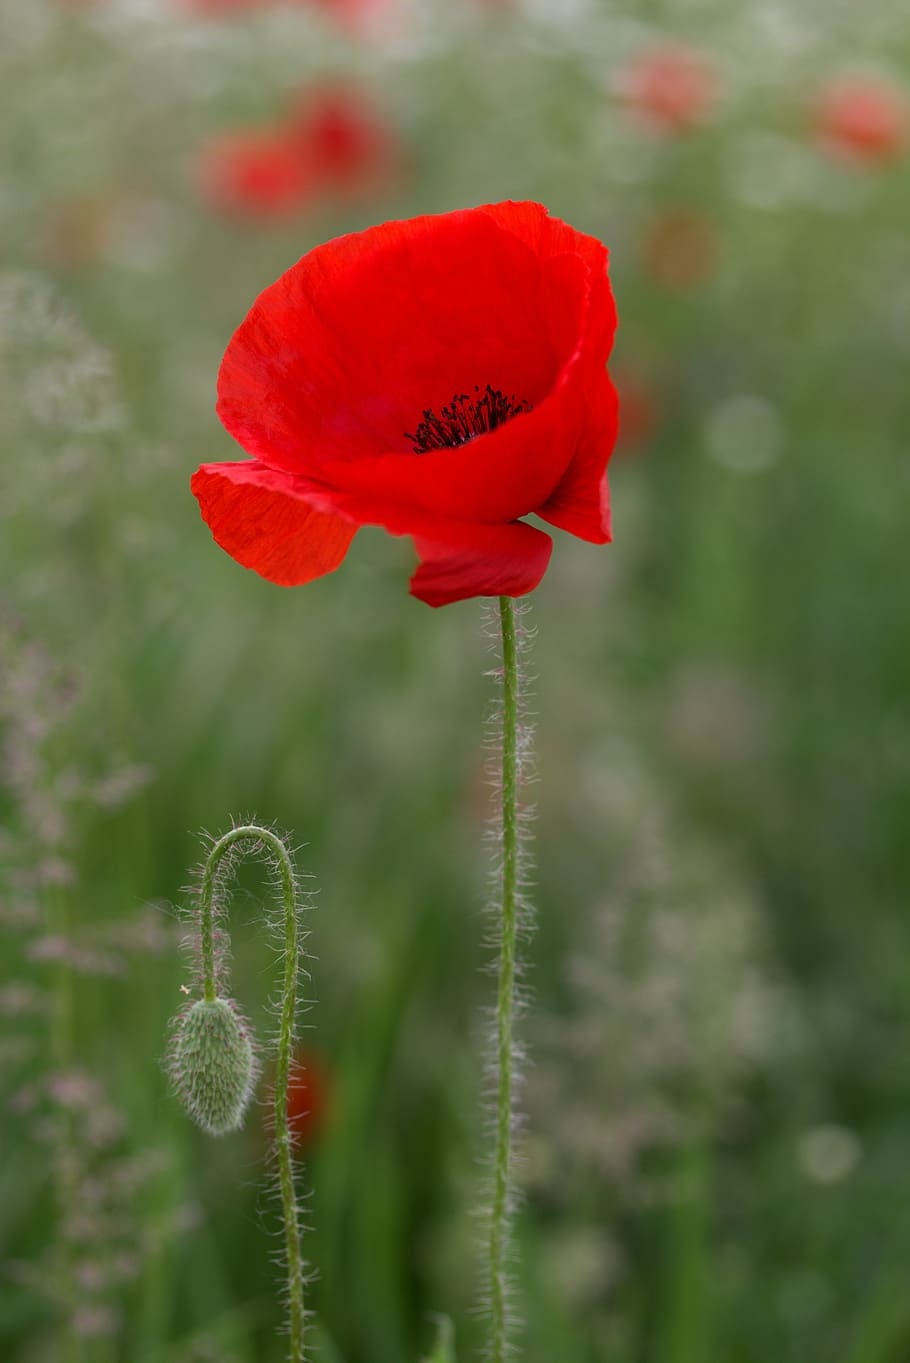 Free Mobile Wallpaper of Red Poppies Beautiful  awesome flower wallpaper  Free desktop wal  Poppy wallpaper Best flower wallpaper Beautiful flowers  wallpapers